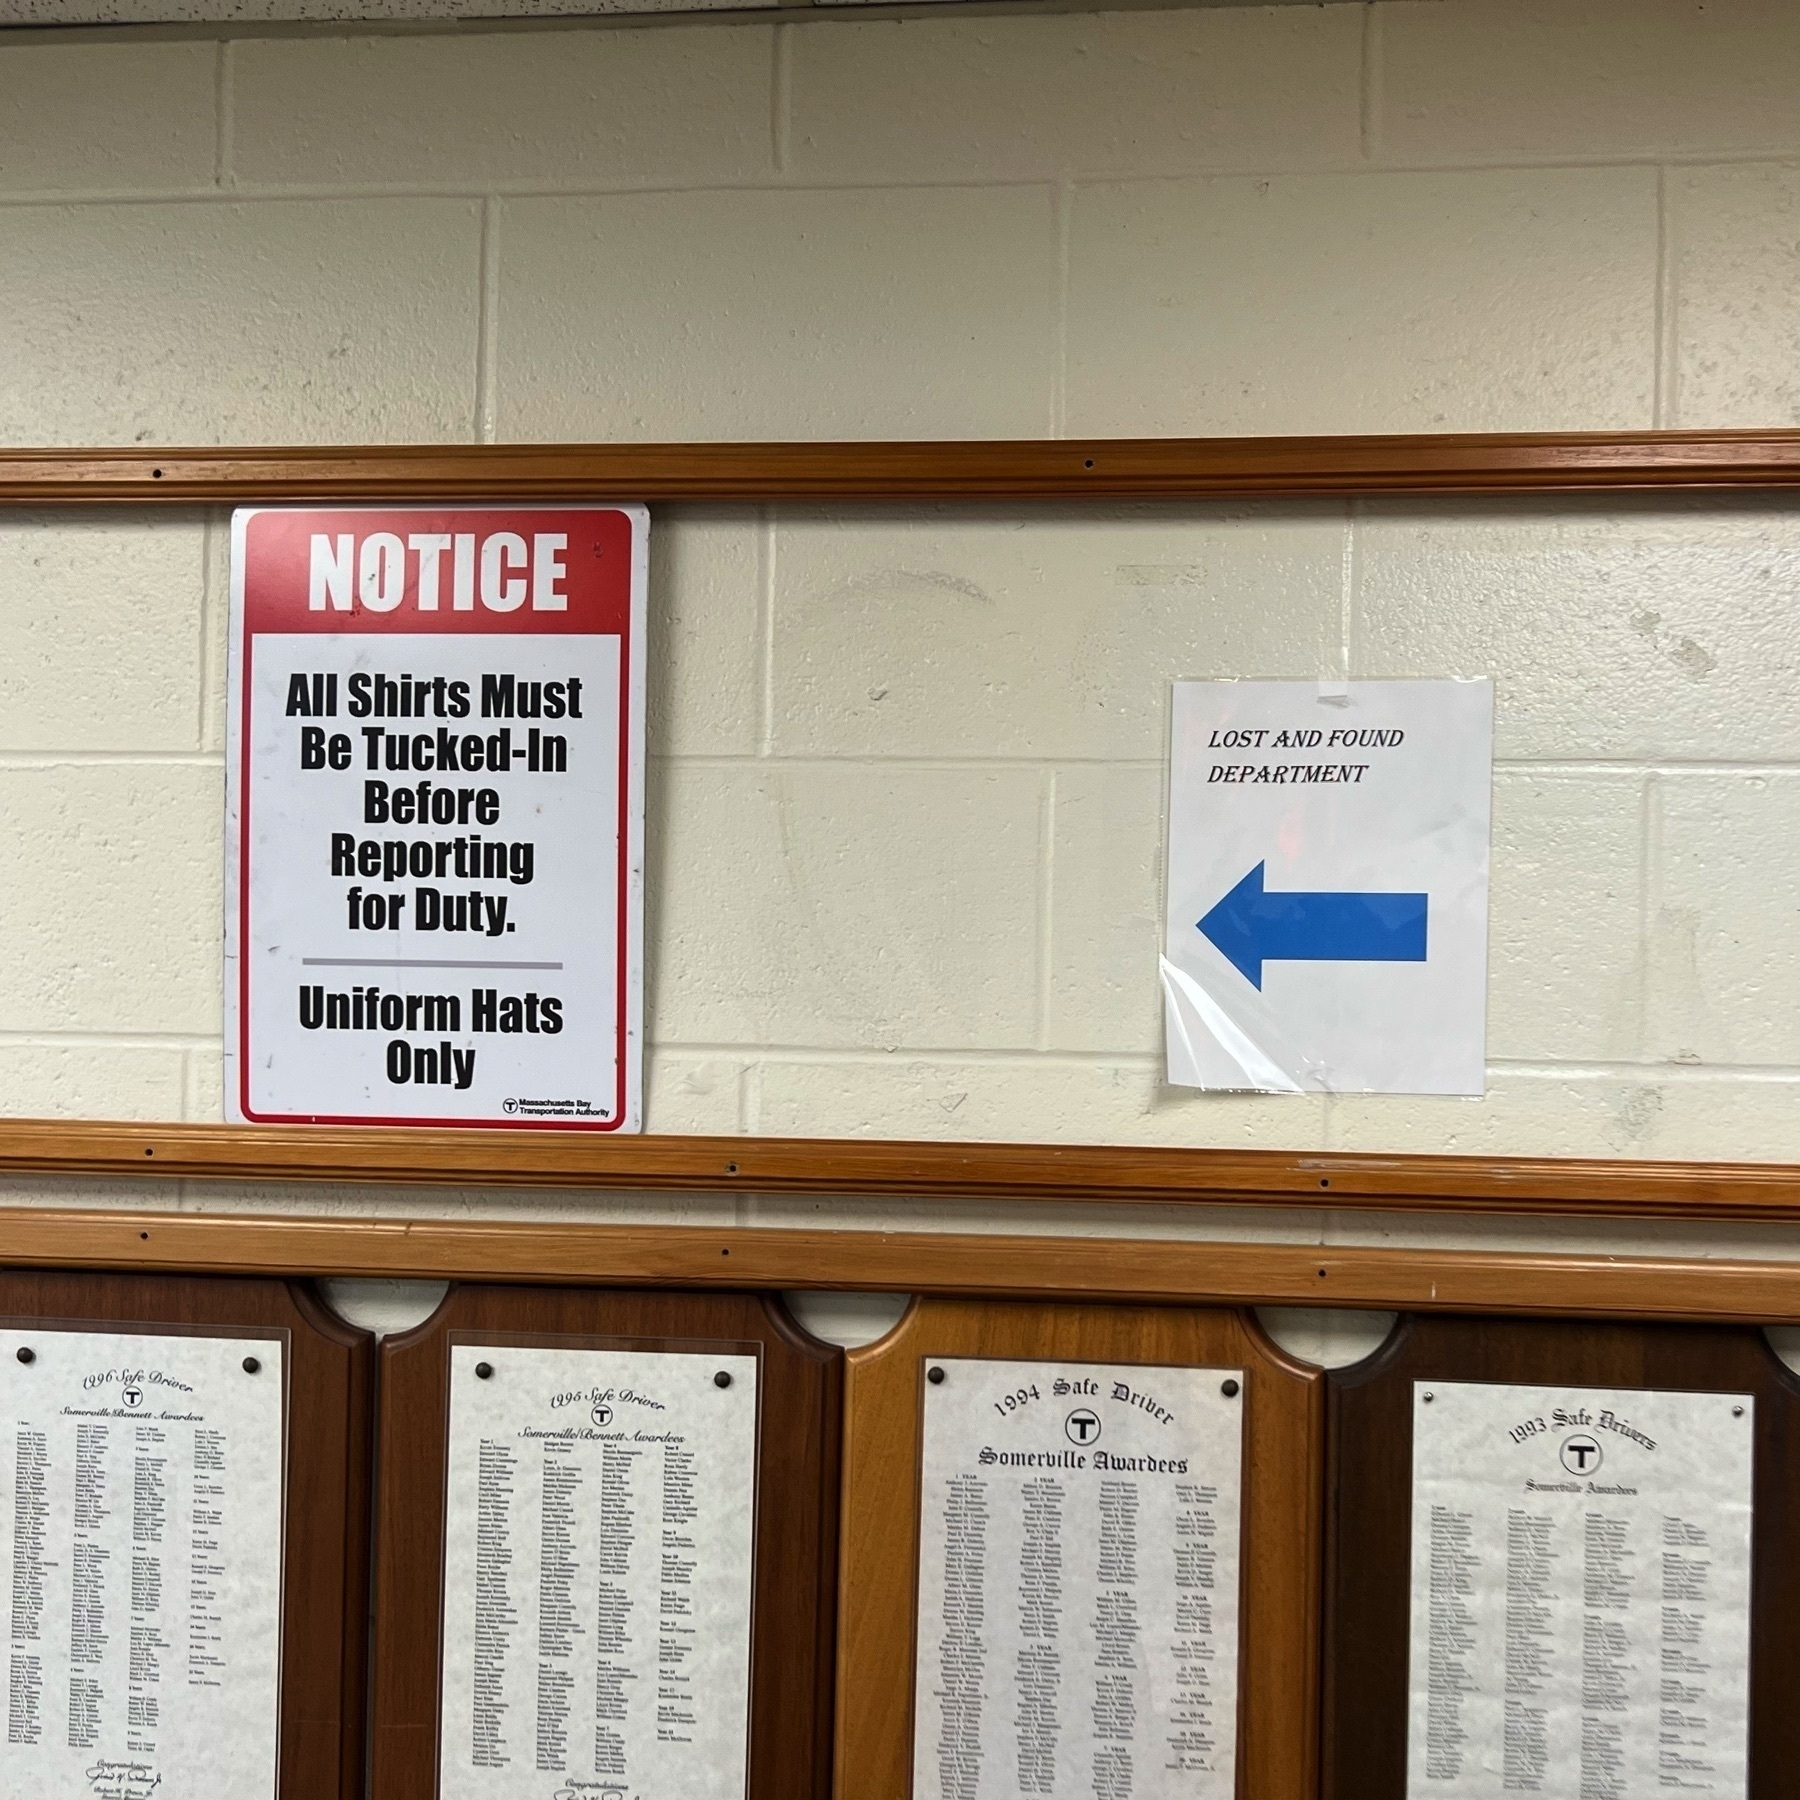 Picture of an interior office building wall with a sign "All shirt must be tucked in before reporting for duty" next to a sign with an arrow "Lost and Found Department"